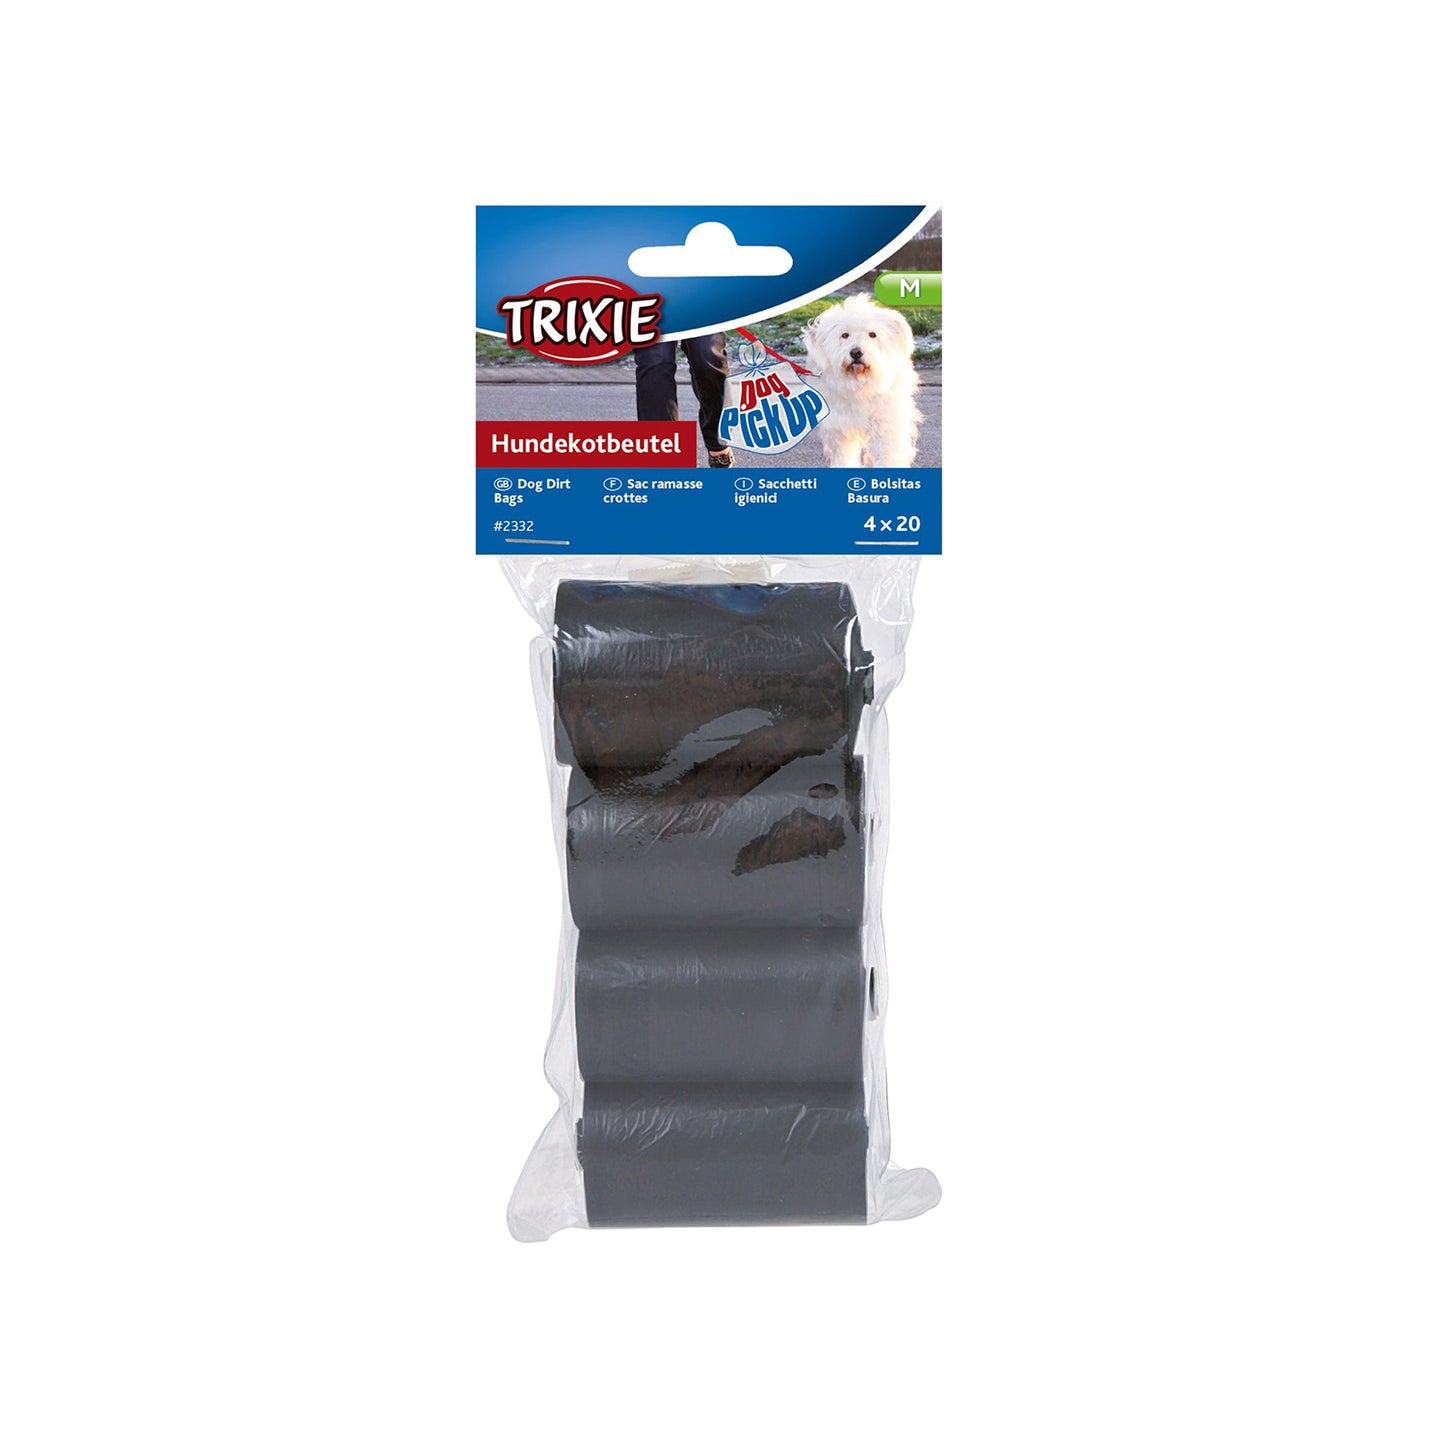 Trixie - Dog Dirt Pick-Up Bags Refill